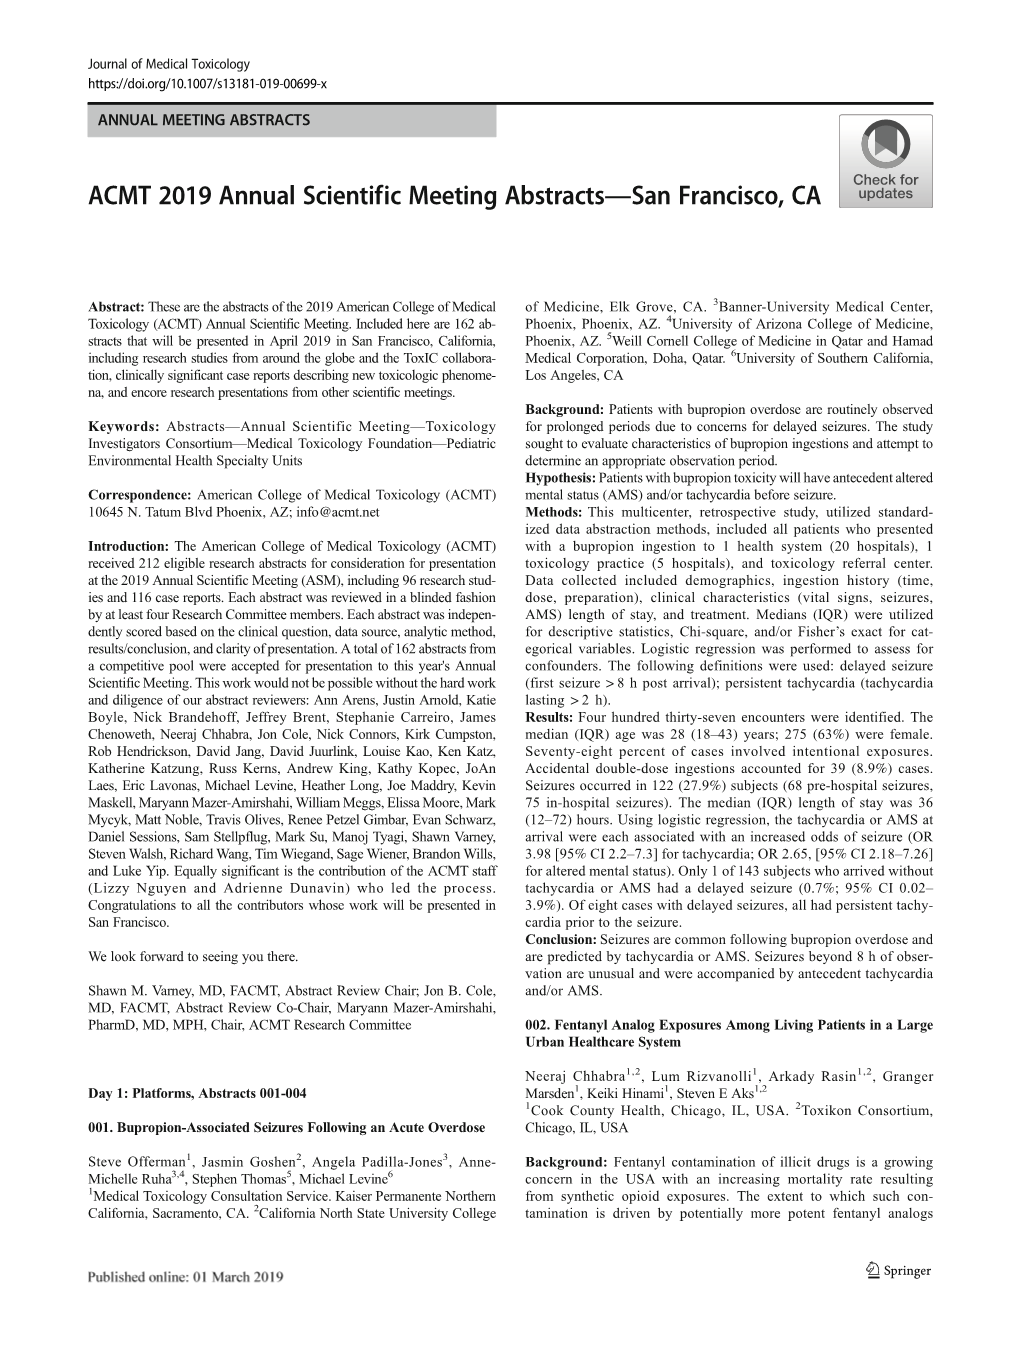 2019 Annual Scientific Meeting Abstracts—San Francisco, CA